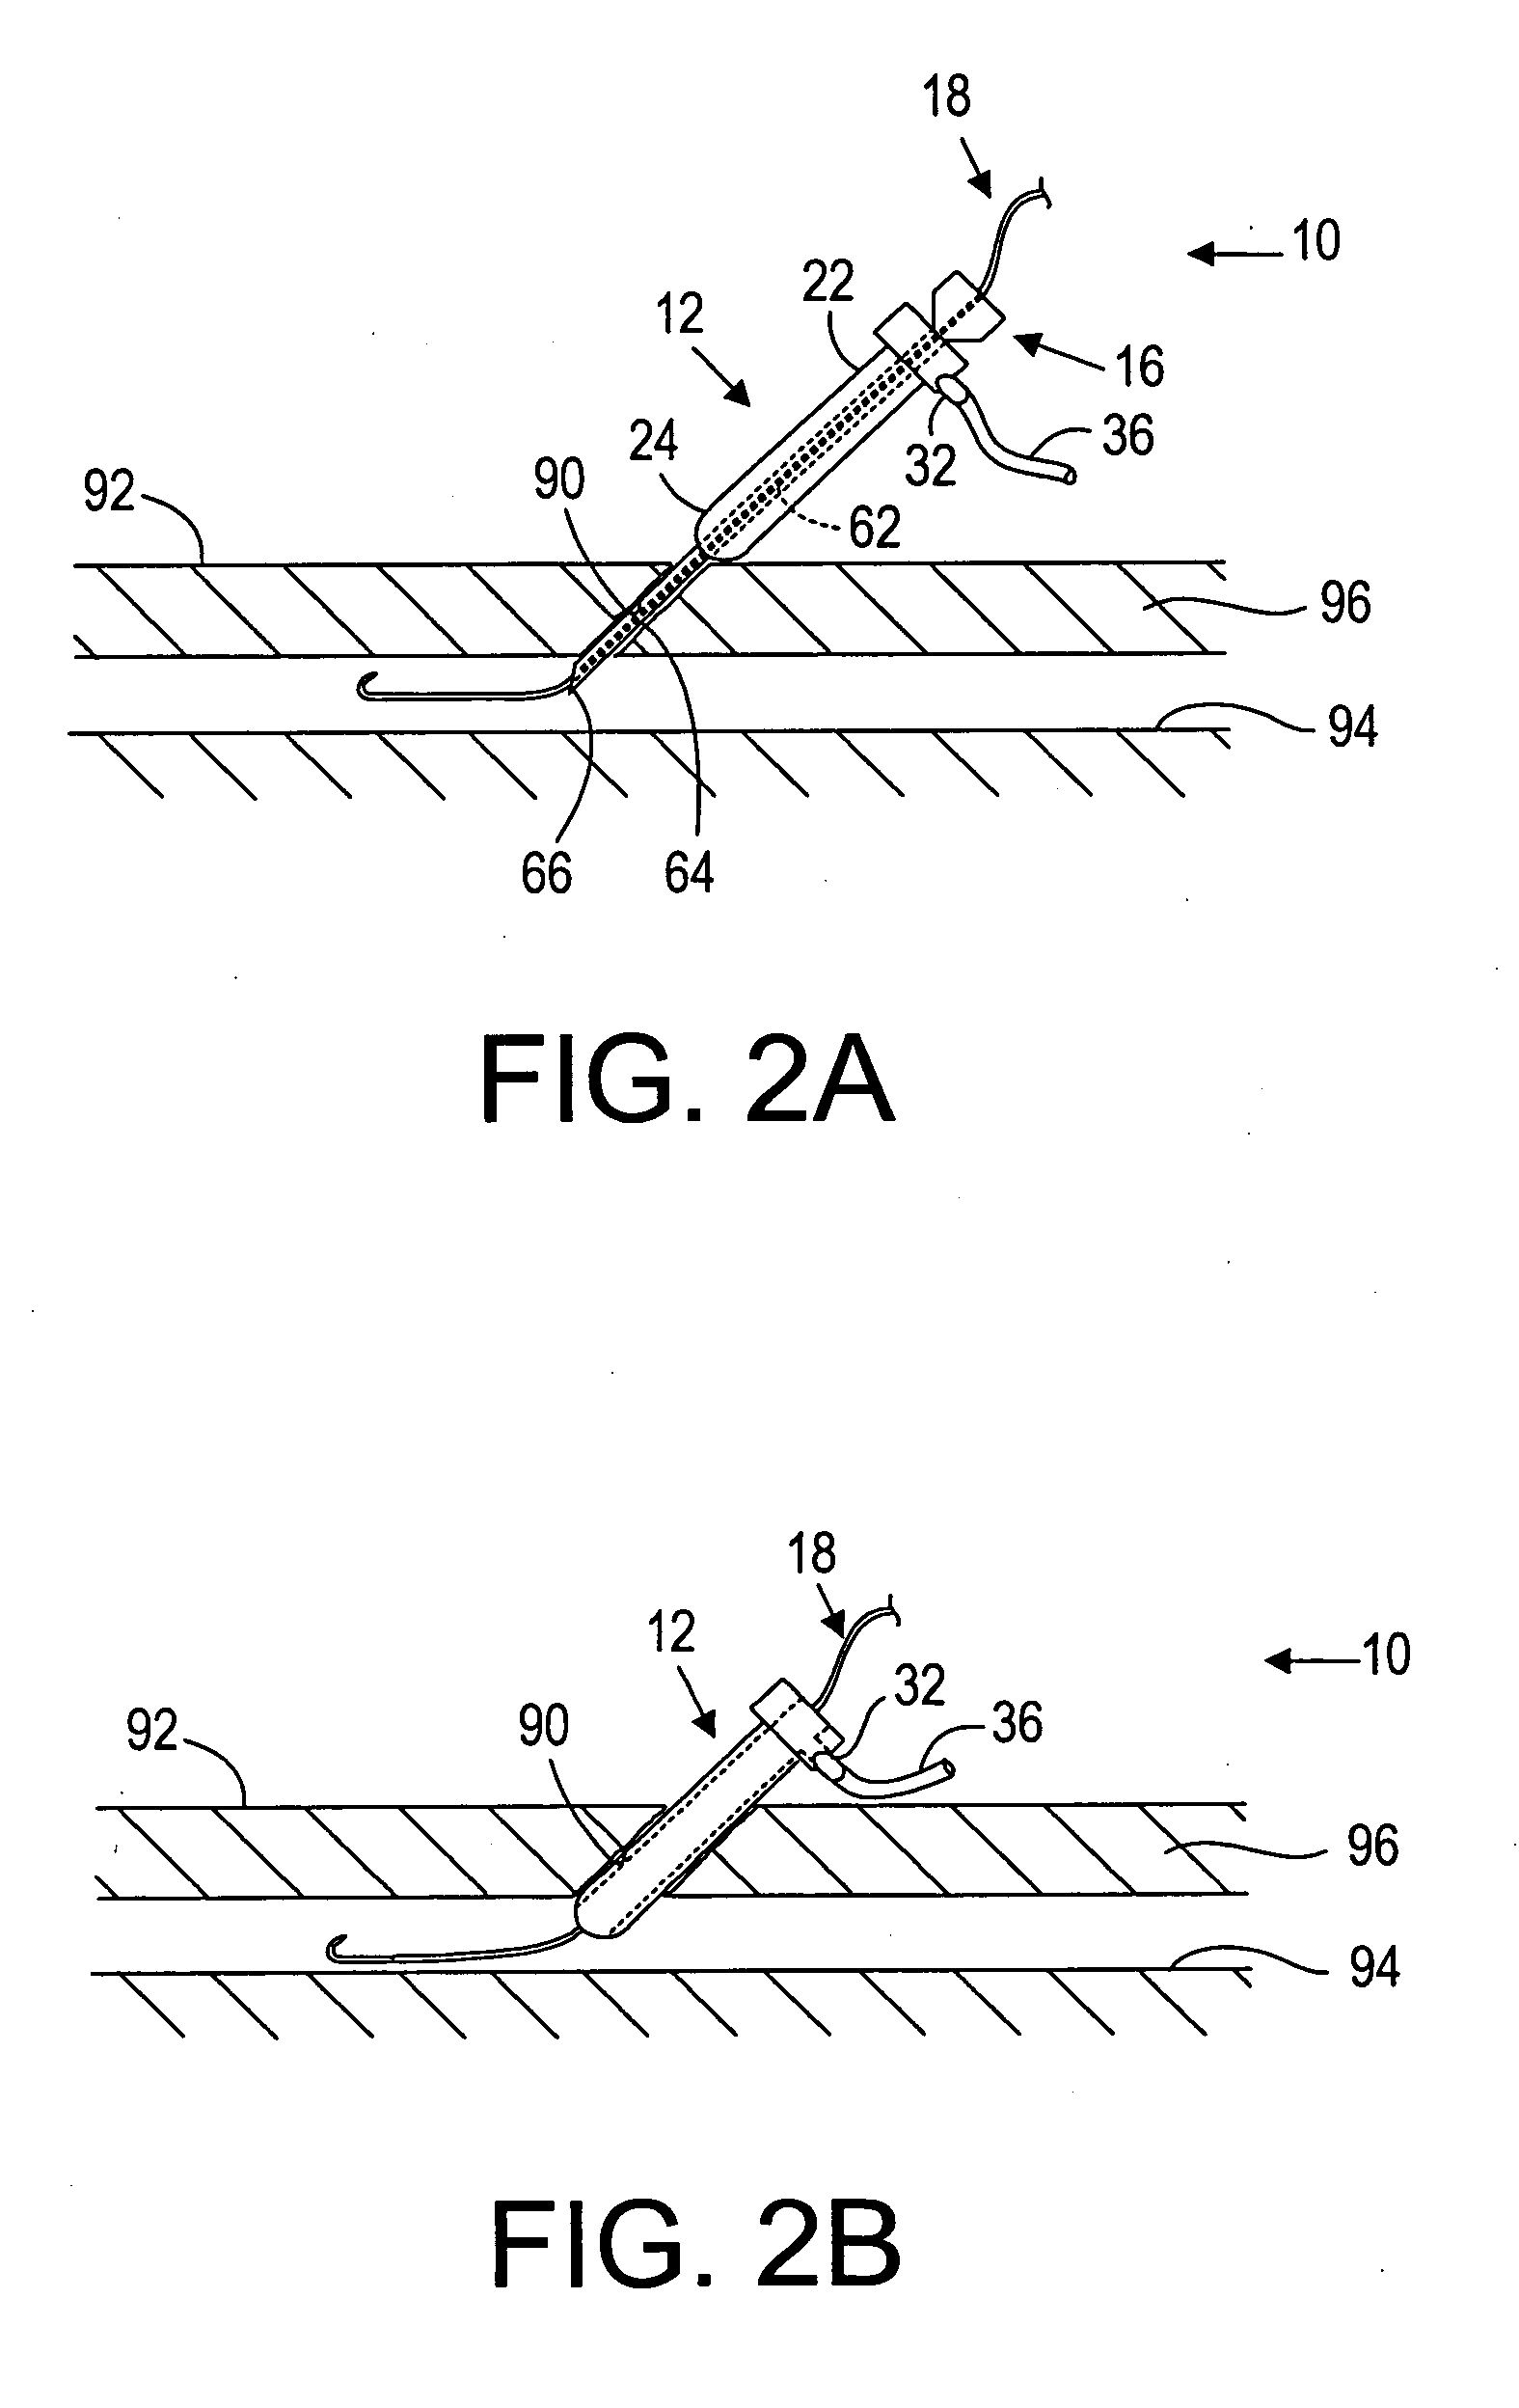 Apparatus and methods for delivering sealing materials during a percutaneous procedure to facilitate hemostasis